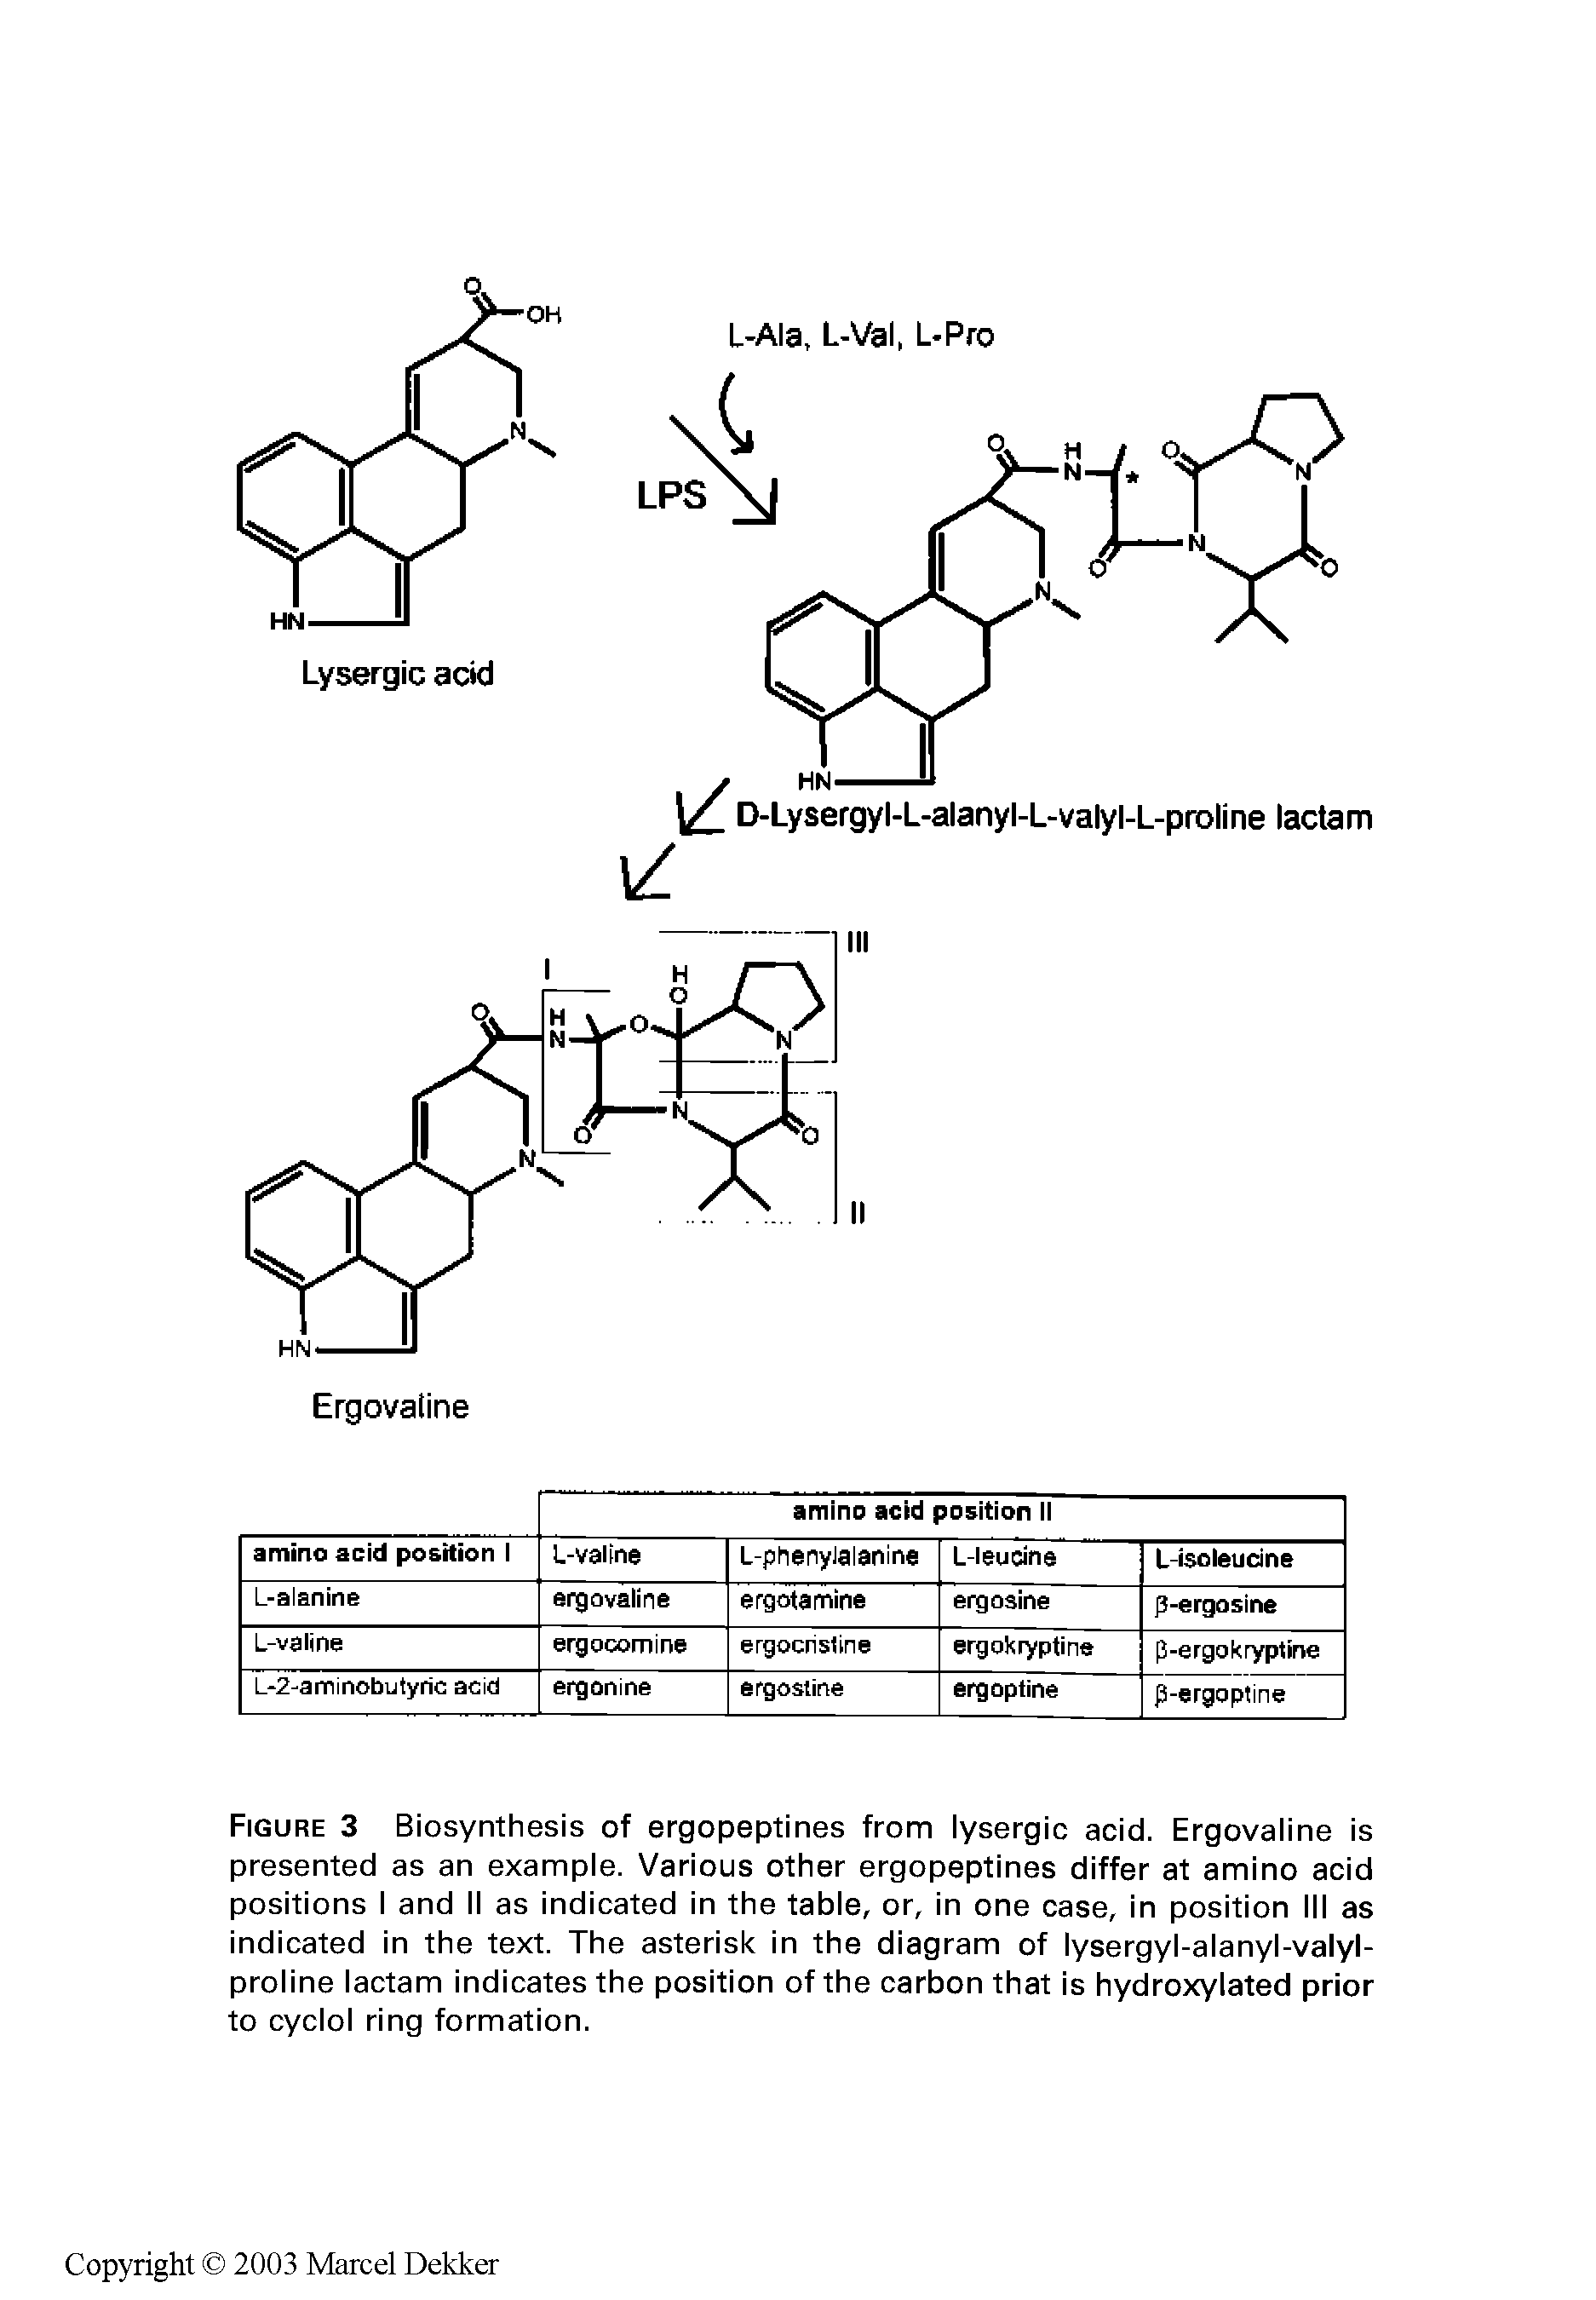 Figure 3 Biosynthesis of ergopeptines from lysergic acid. Ergovaline is presented as an example. Various other ergopeptines differ at amino acid positions I and II as indicated in the table, or, in one case, in position III as indicated in the text. The asterisk in the diagram of lysergyl-alanyl-valyl-proline lactam indicates the position of the carbon that is hydroxylated prior to cyclol ring formation.